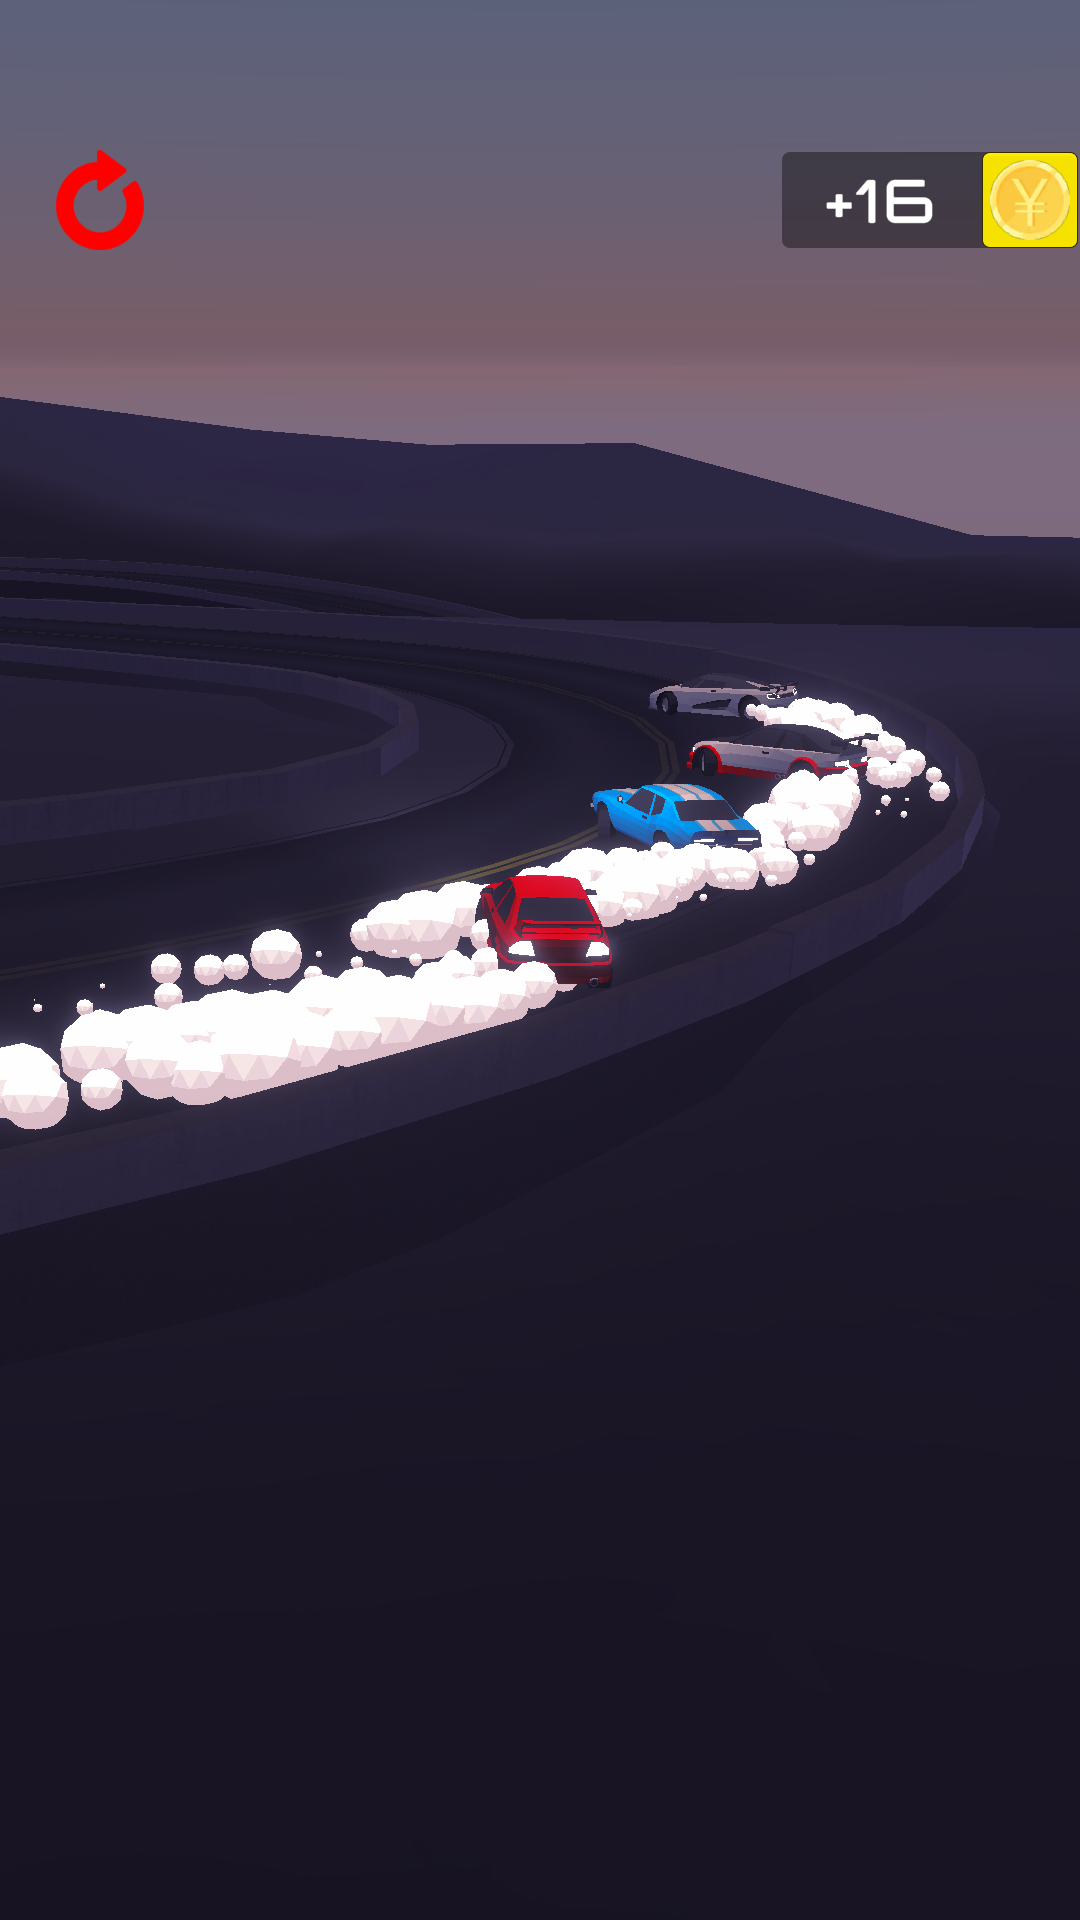 Touge Drift & Racing Web, Android game - IndieDB